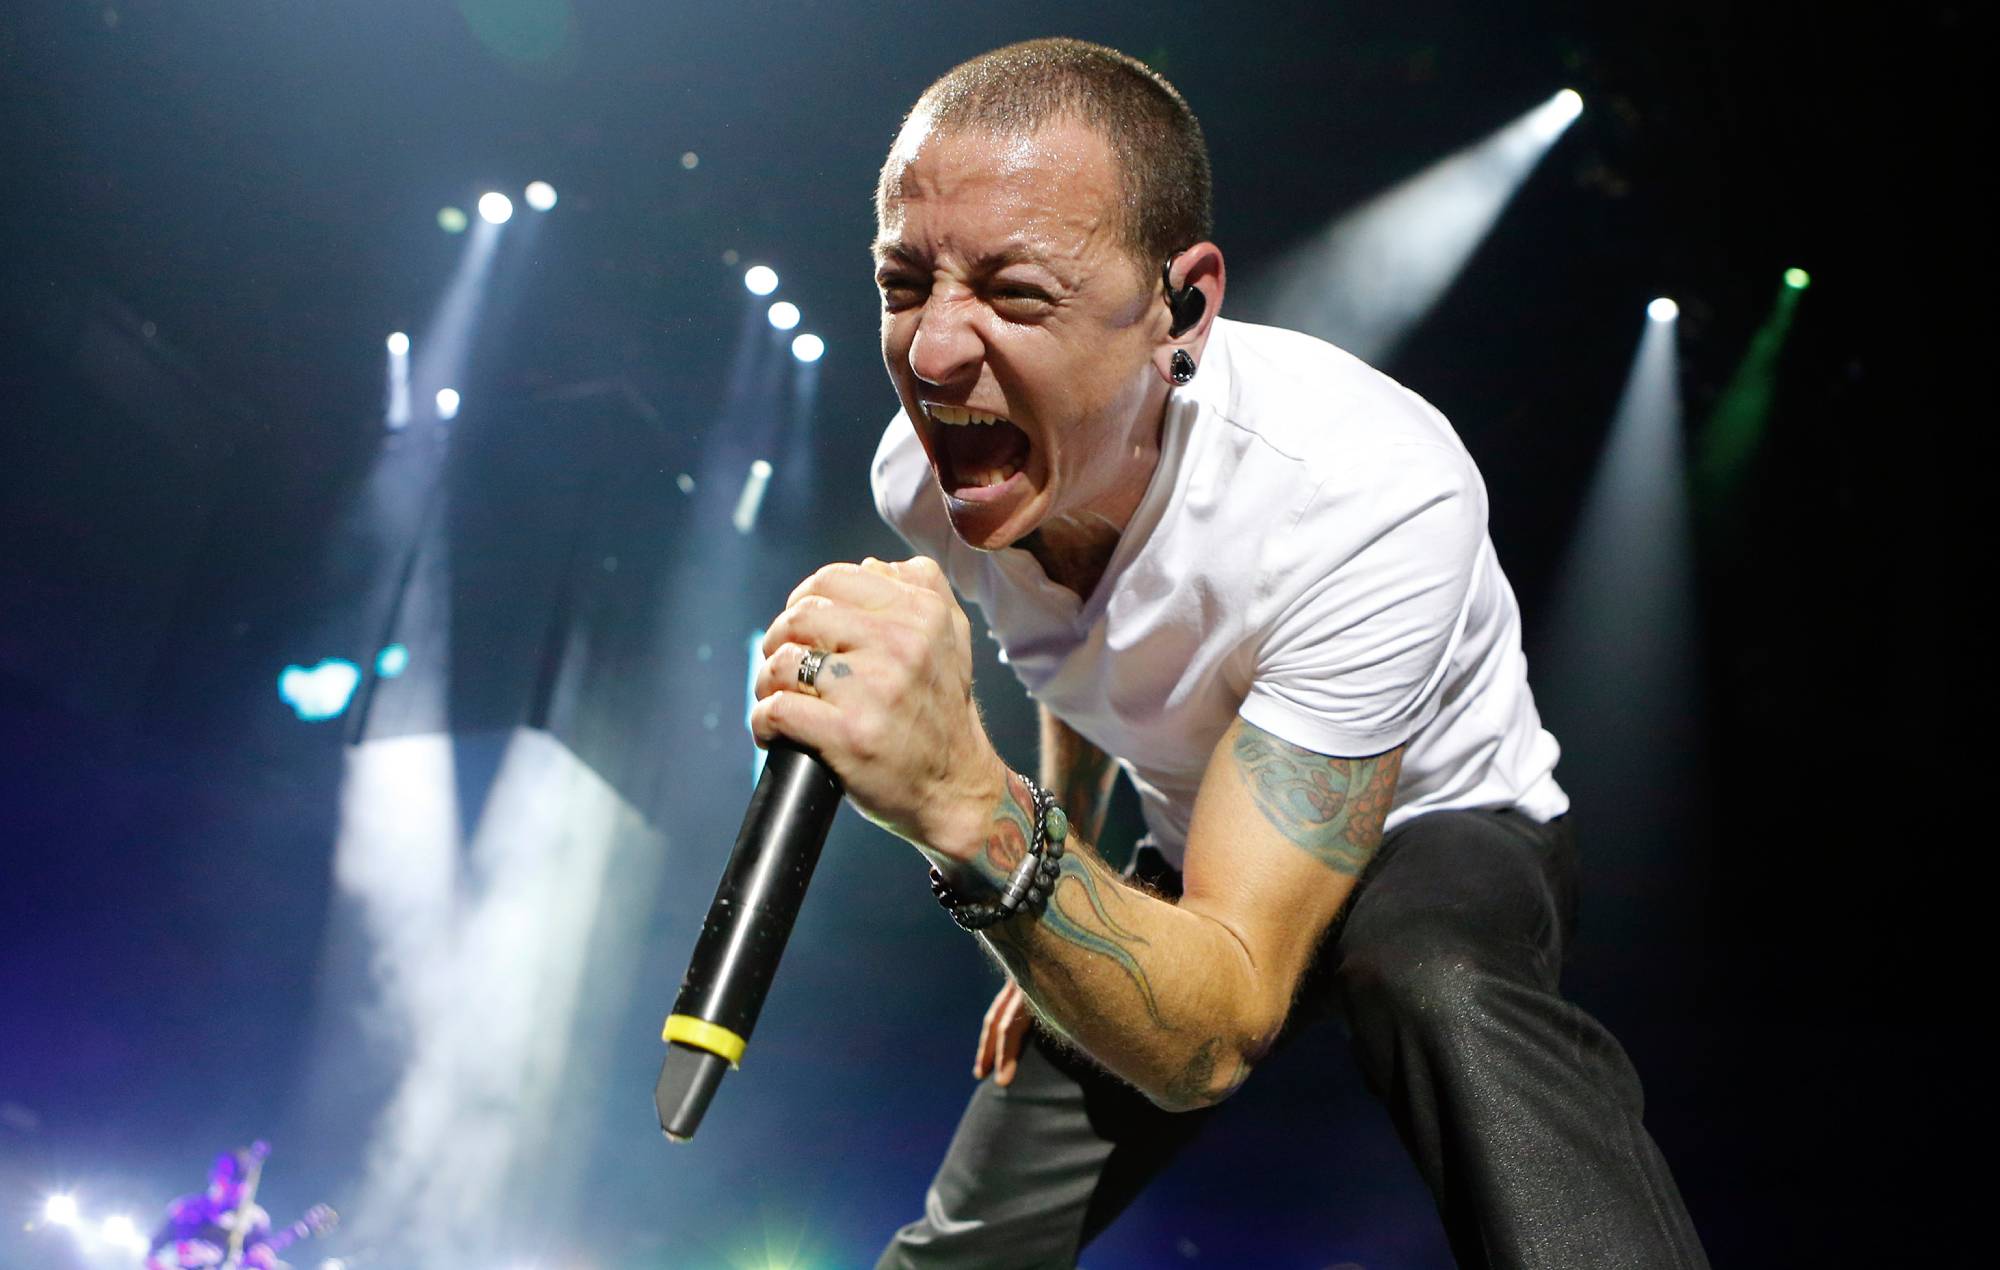 1,000 musicians featuring members of Funeral For A Friend, The Blackout and more to celebrate the music of Linkin Park at huge Birmingham Arena gig